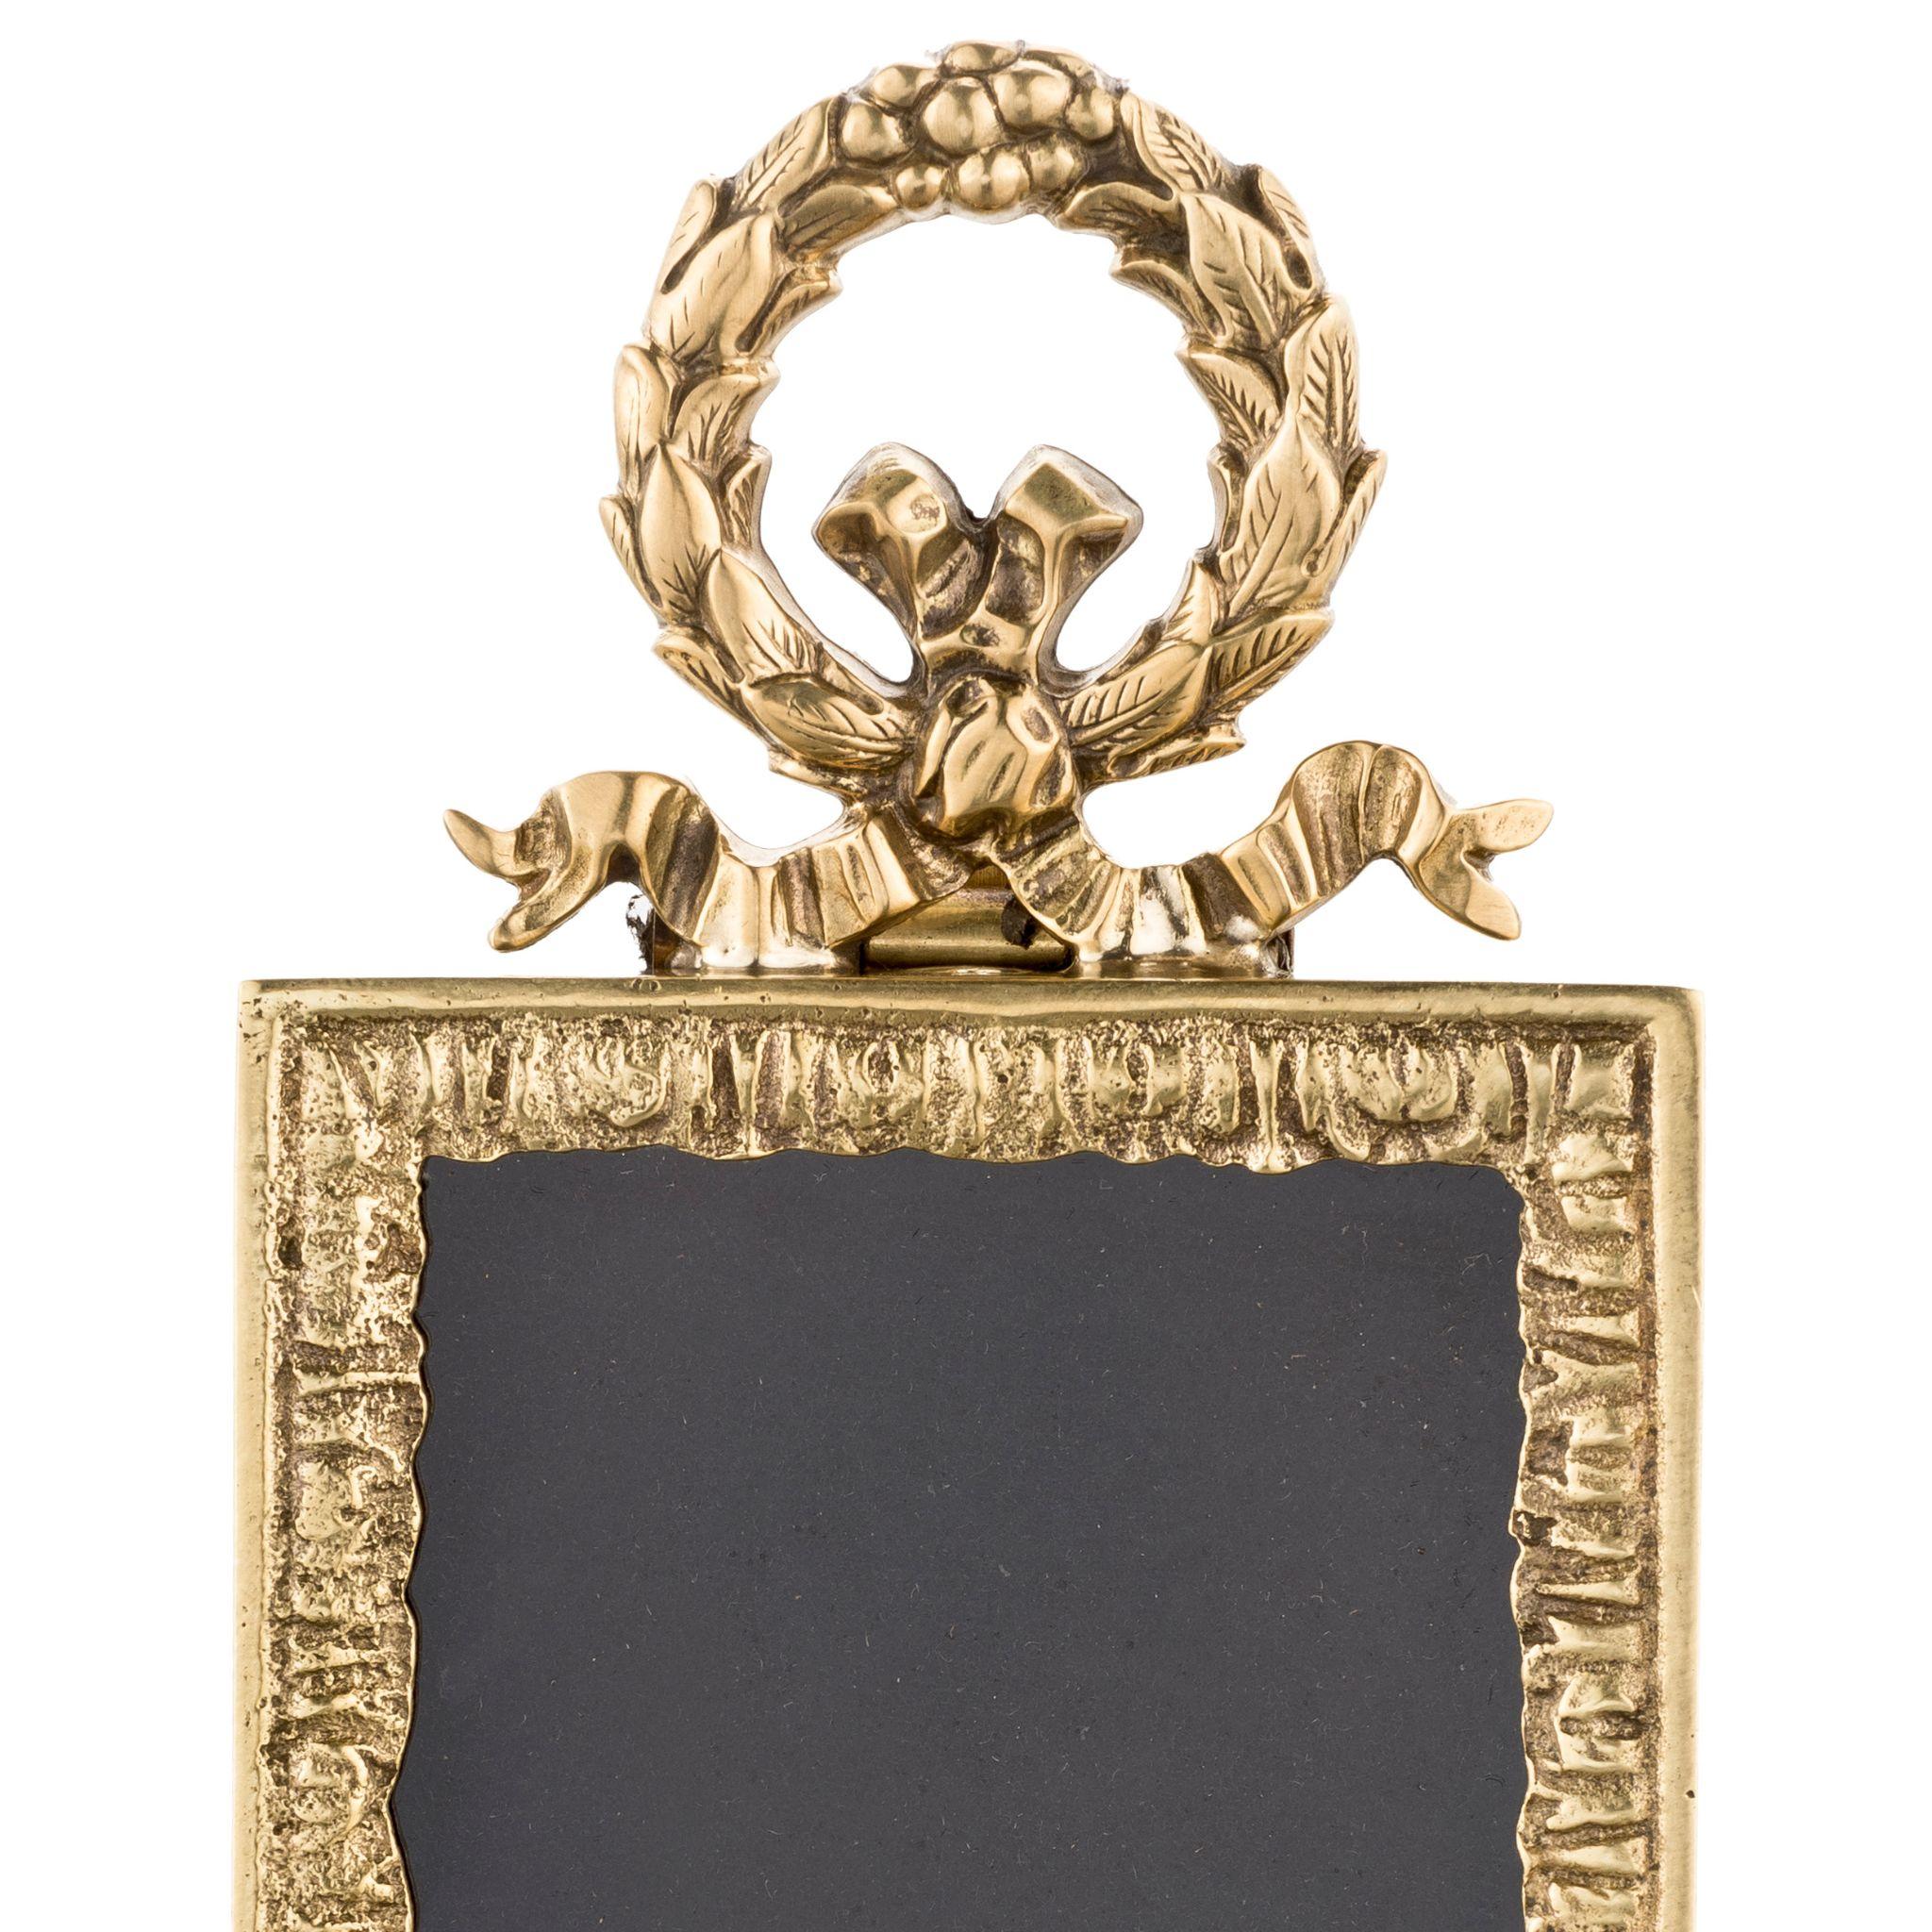 Showcase your favorite photos in our beautiful Sissi brass frame with garland. Crafted from high-quality brass, this exquisite frame features intricate garland detailing that adds a touch of sophistication to any decor. Its timeless design and